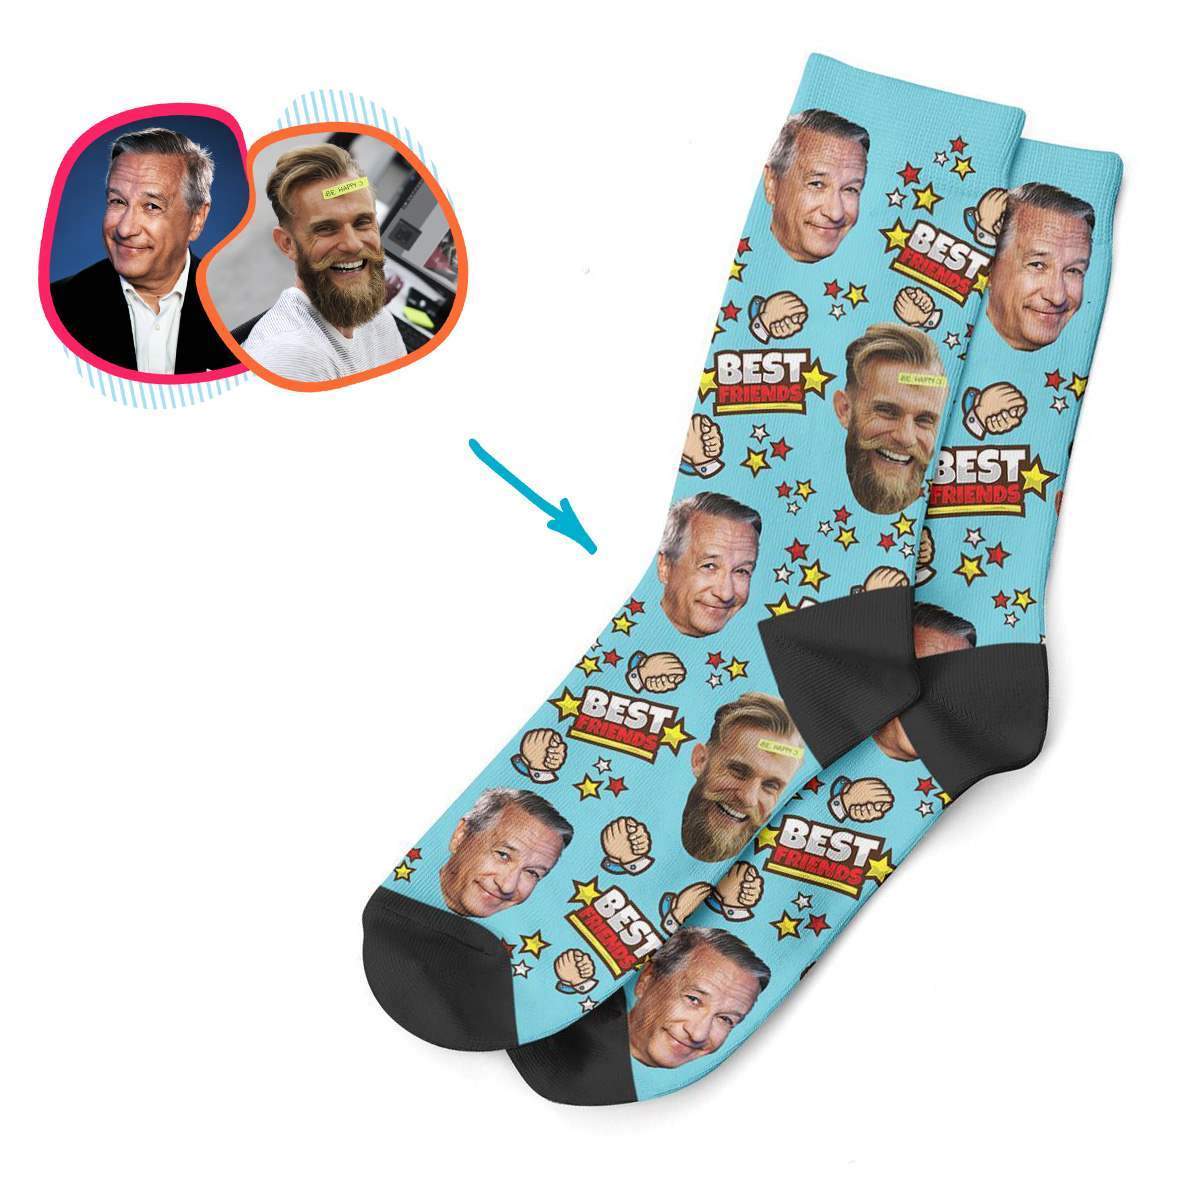 darkblue Best Friends socks personalized with photo of face printed on them